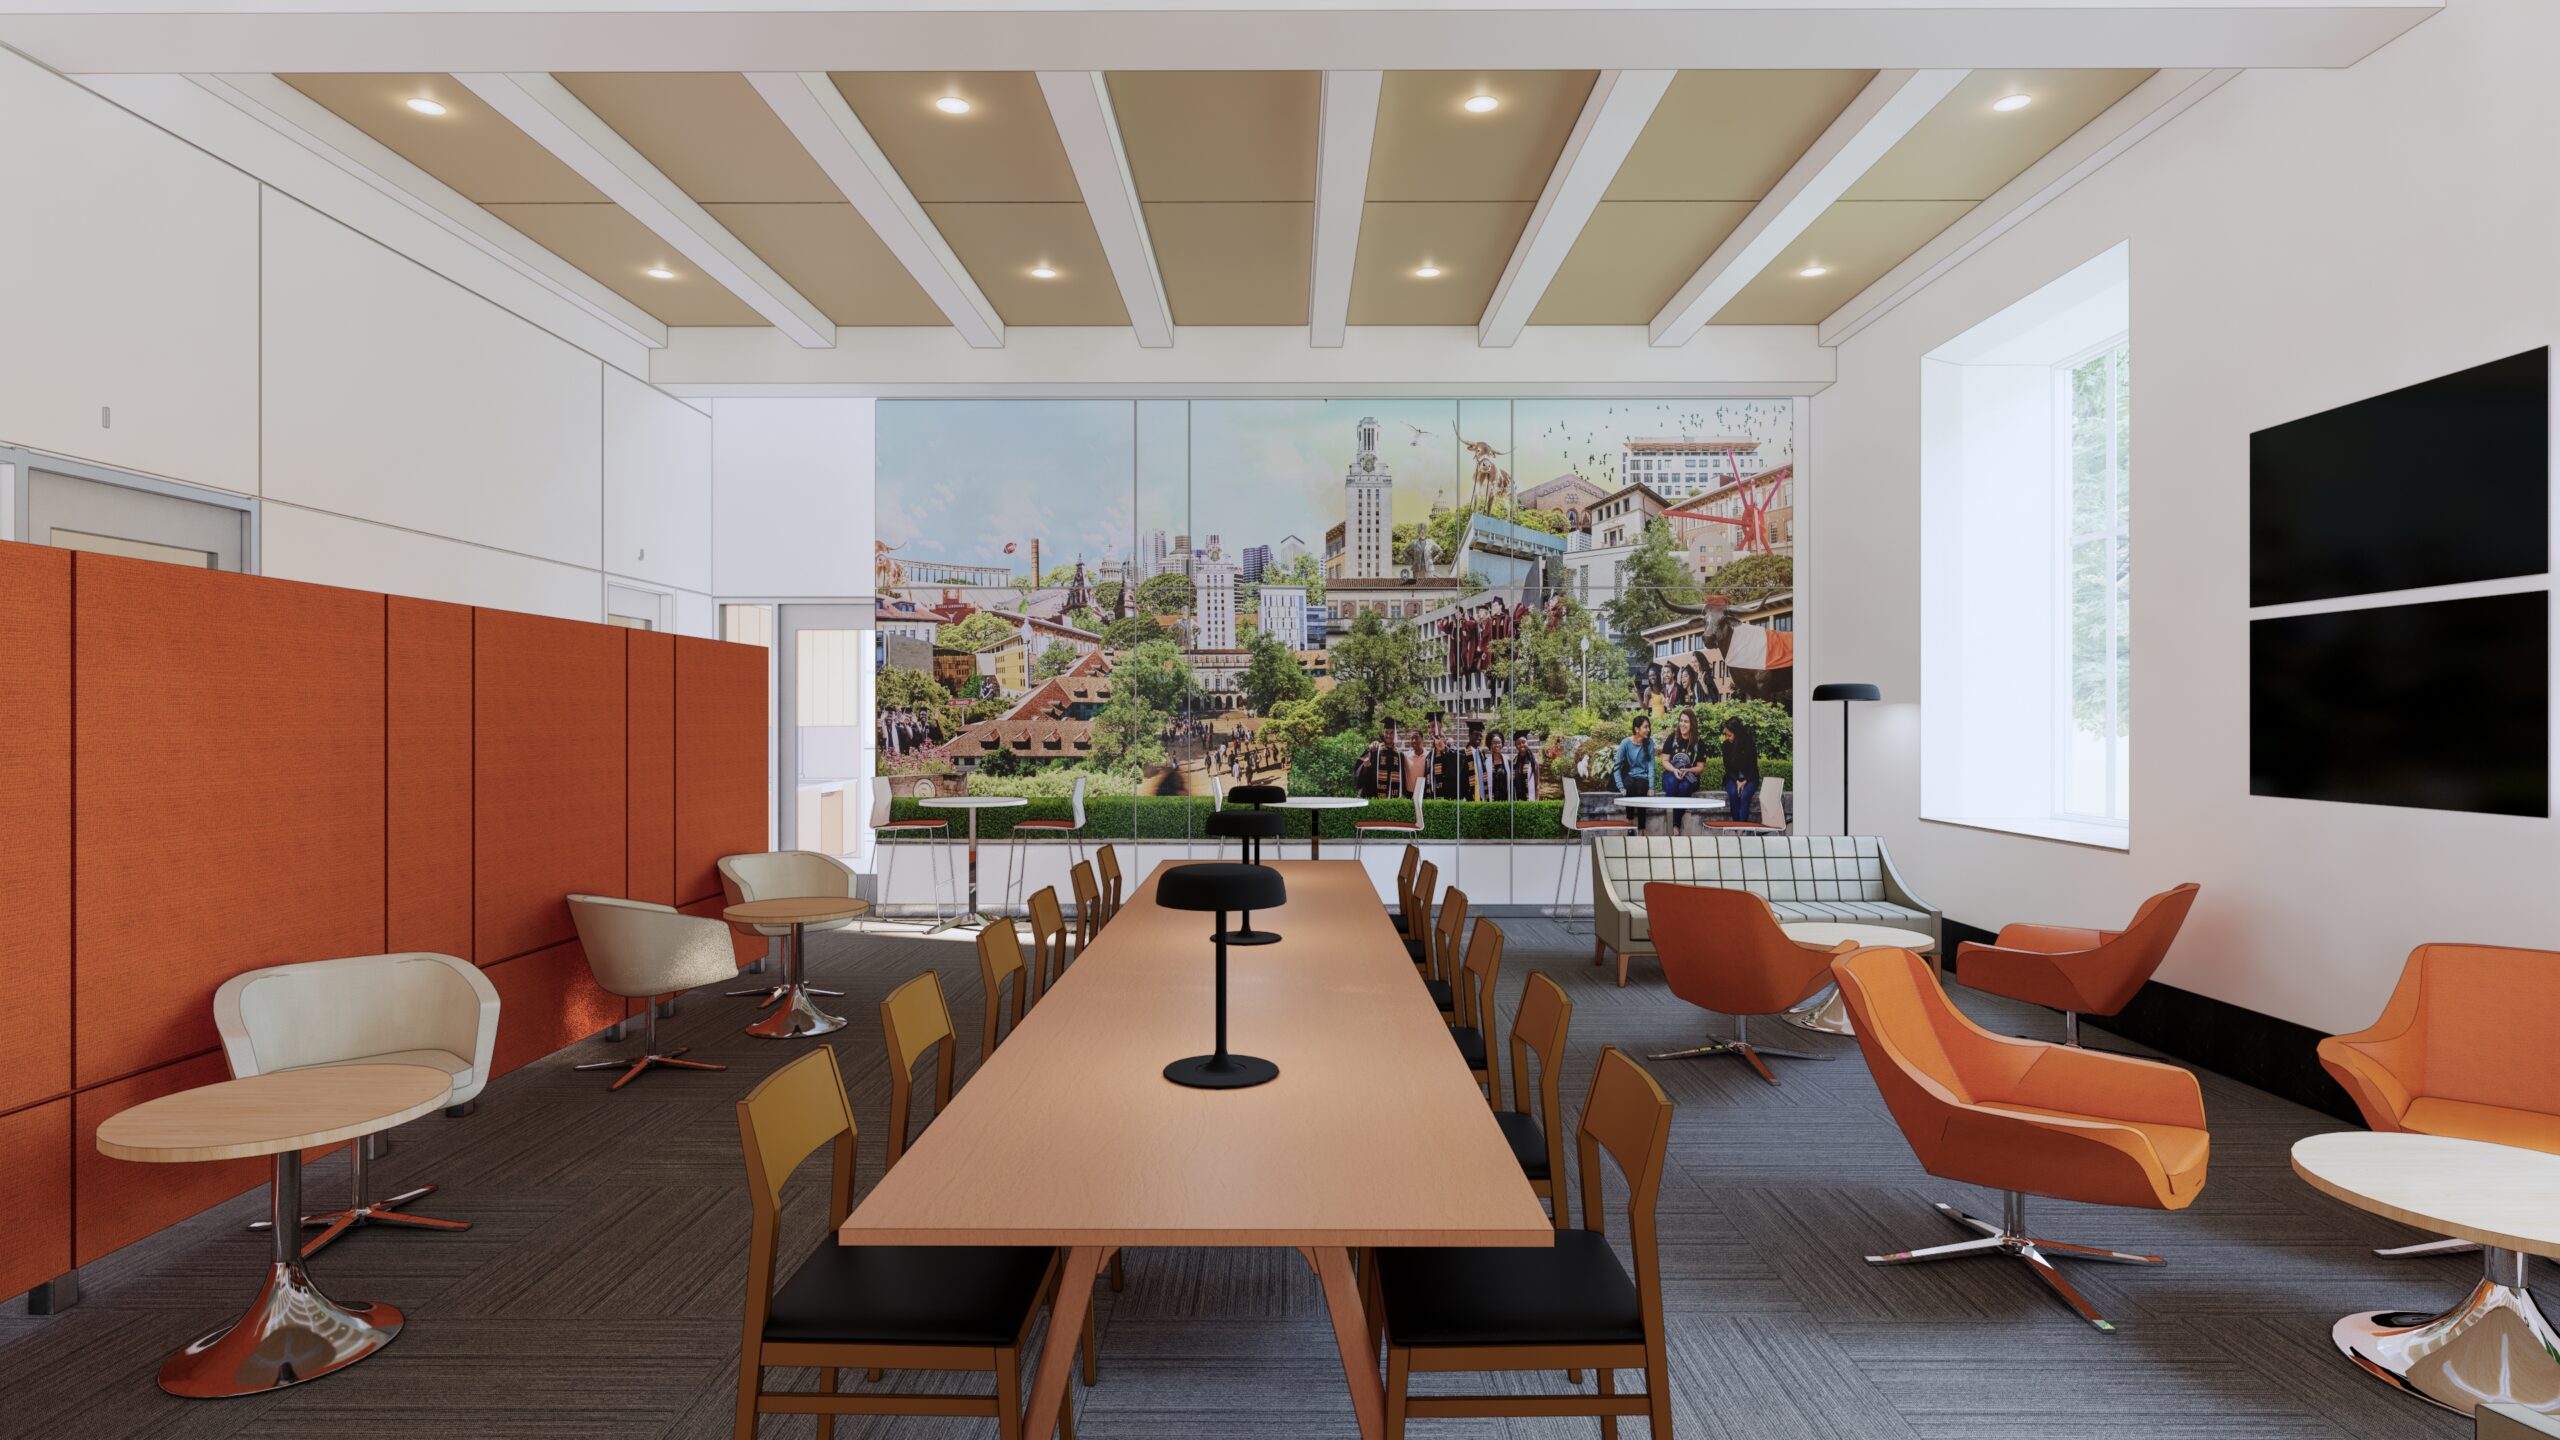 rendering of University of Texas financial wellness center with long table (vertically) in middle of open space room and small individual seating and tables along each side, office rooms along wall behind partition on left, windows and tv screens right wall, mural on wall in background of image